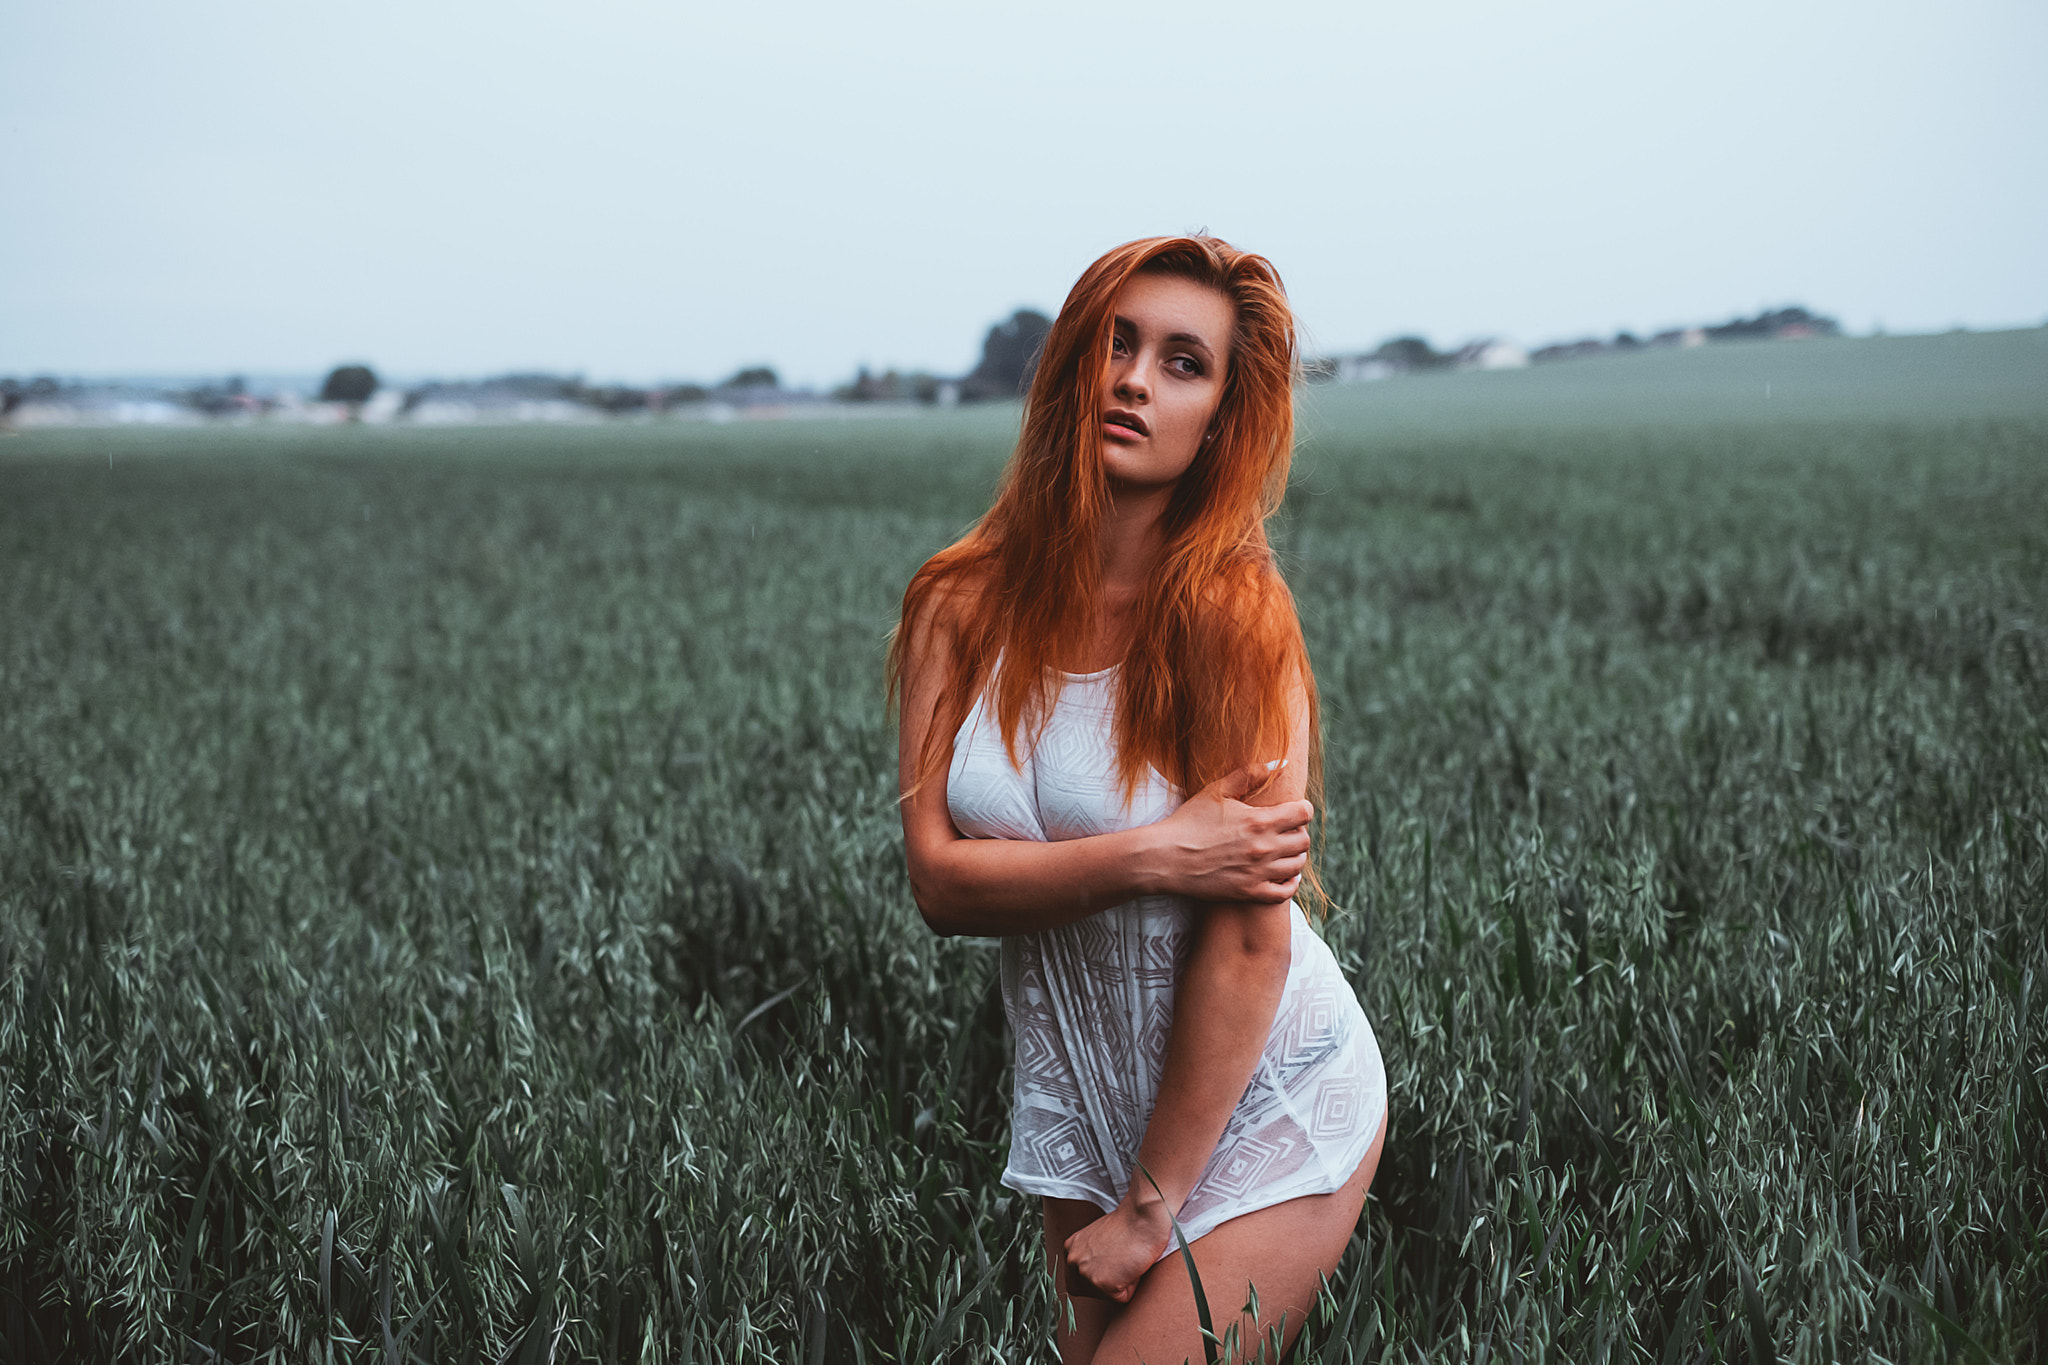 2048x1365 Wallpaper : redhead, portrait, women outdoors, see through clothing, white clothing Motta123 1406983 HD Wallpapers